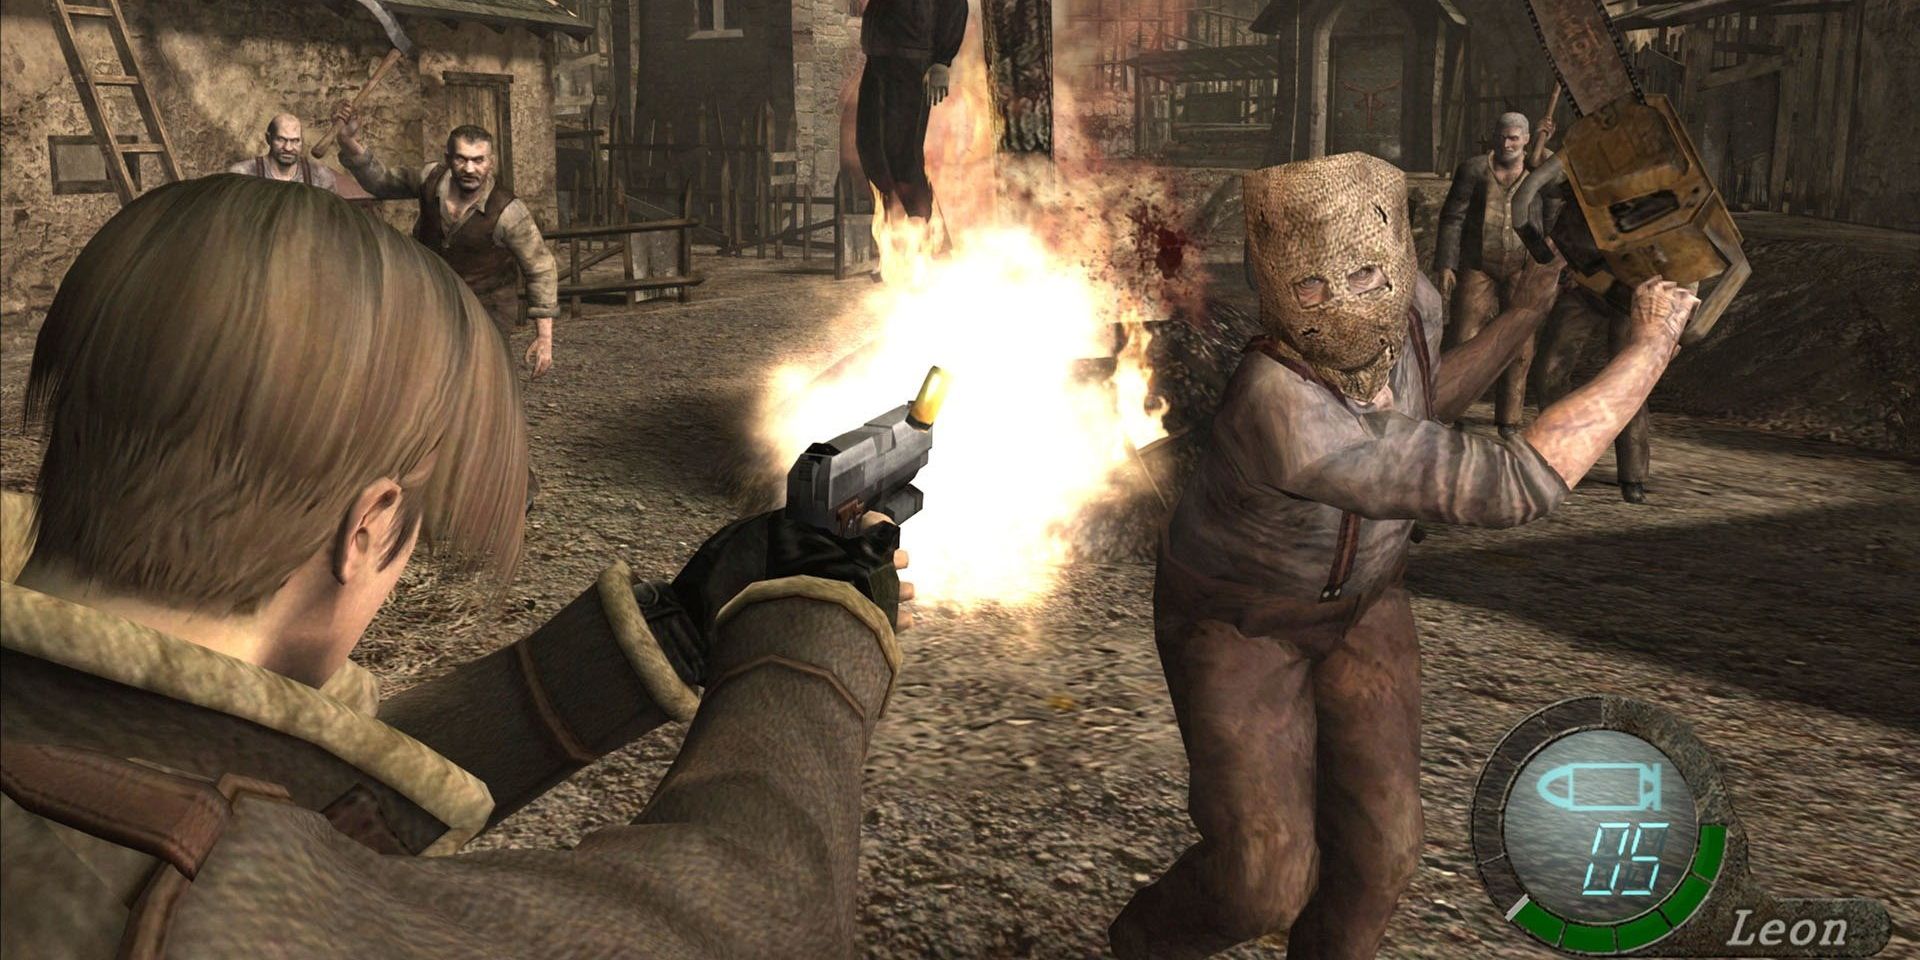 Leon shooting at a chainsaw wielding enemy in Resident Evil 4 HD